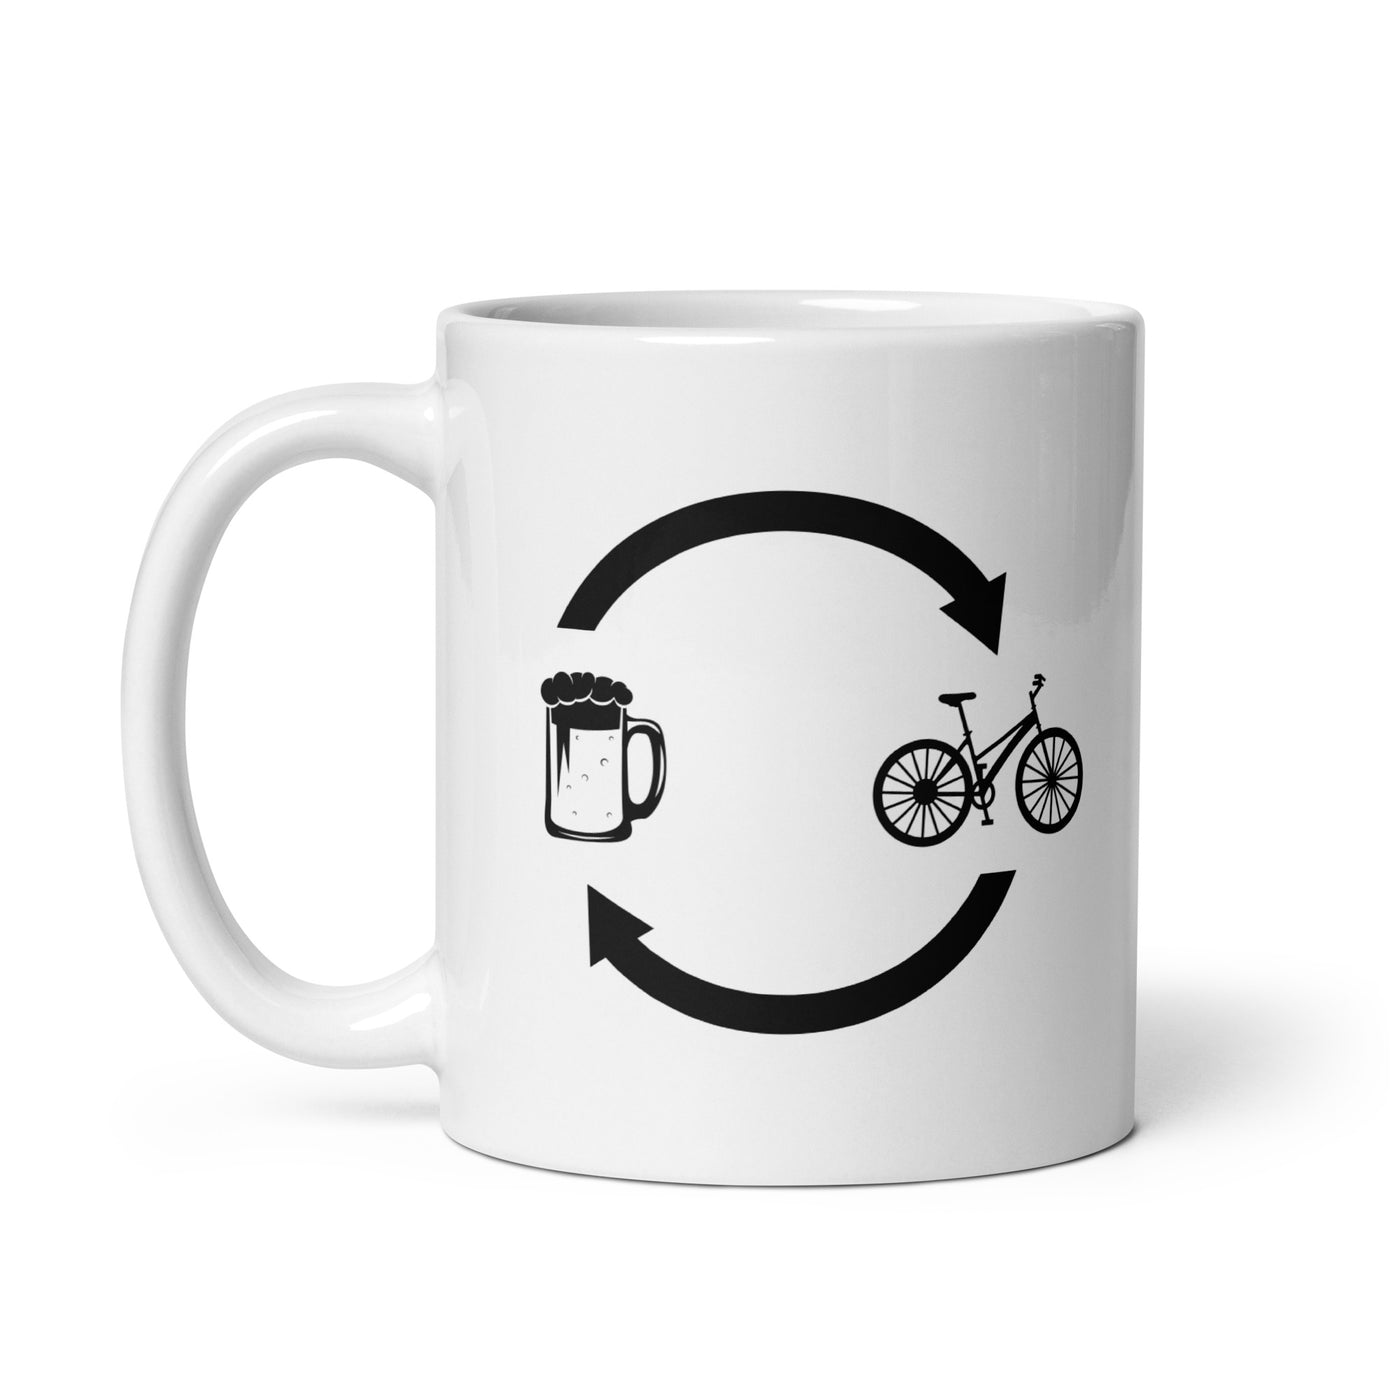 Beer Loading Arrows And Cycling - Tasse fahrrad 11oz